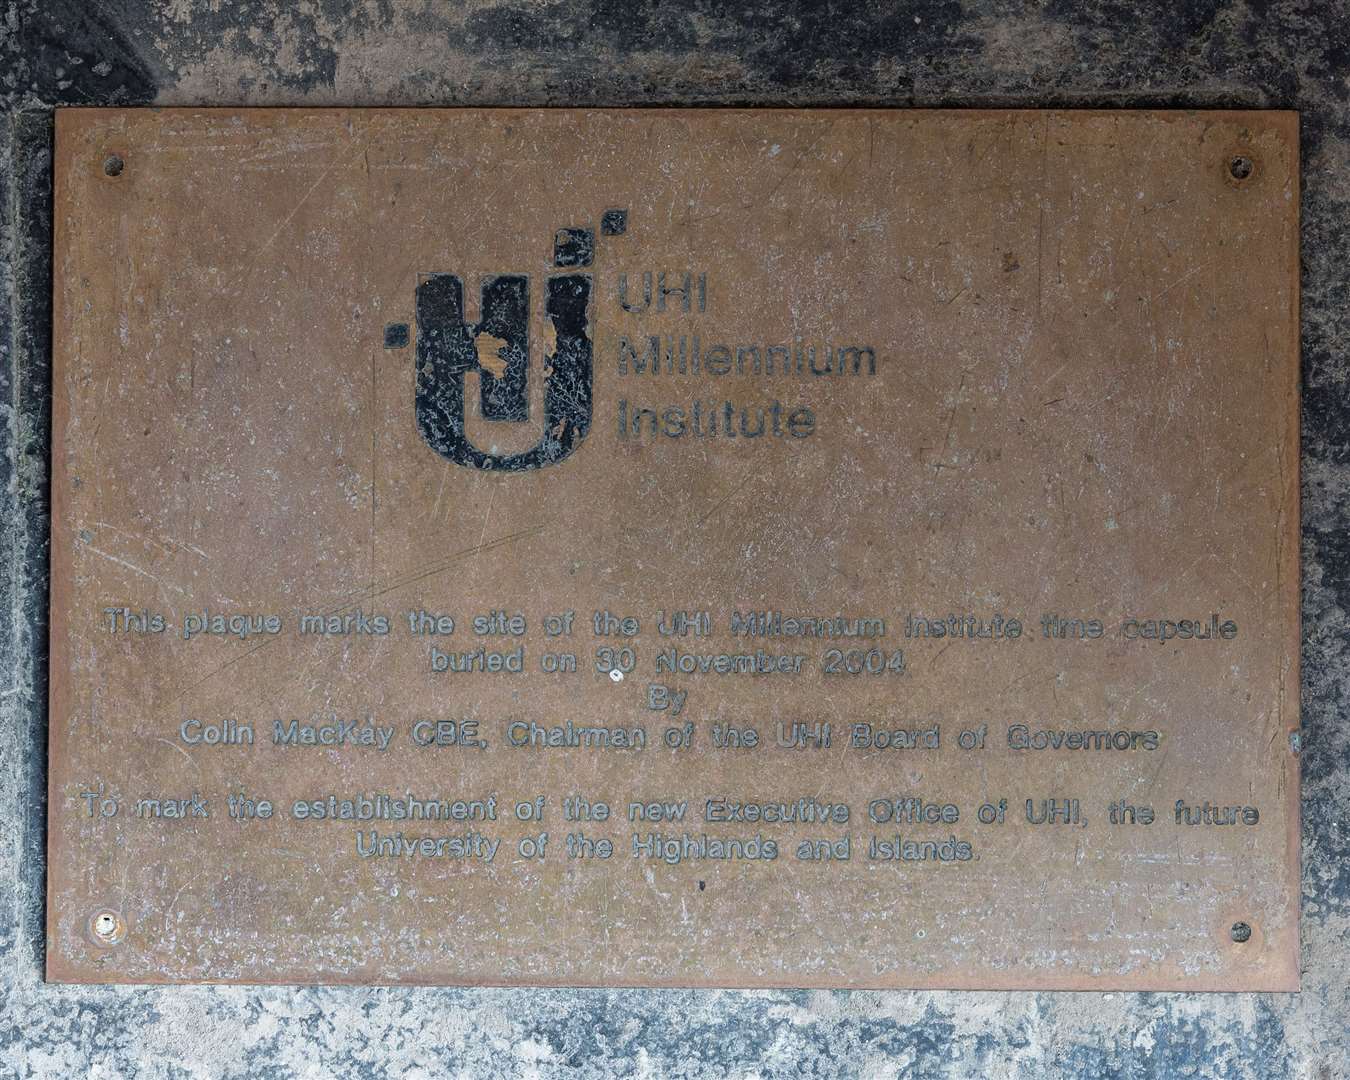 A plaque marked the site of the time capsule burial.